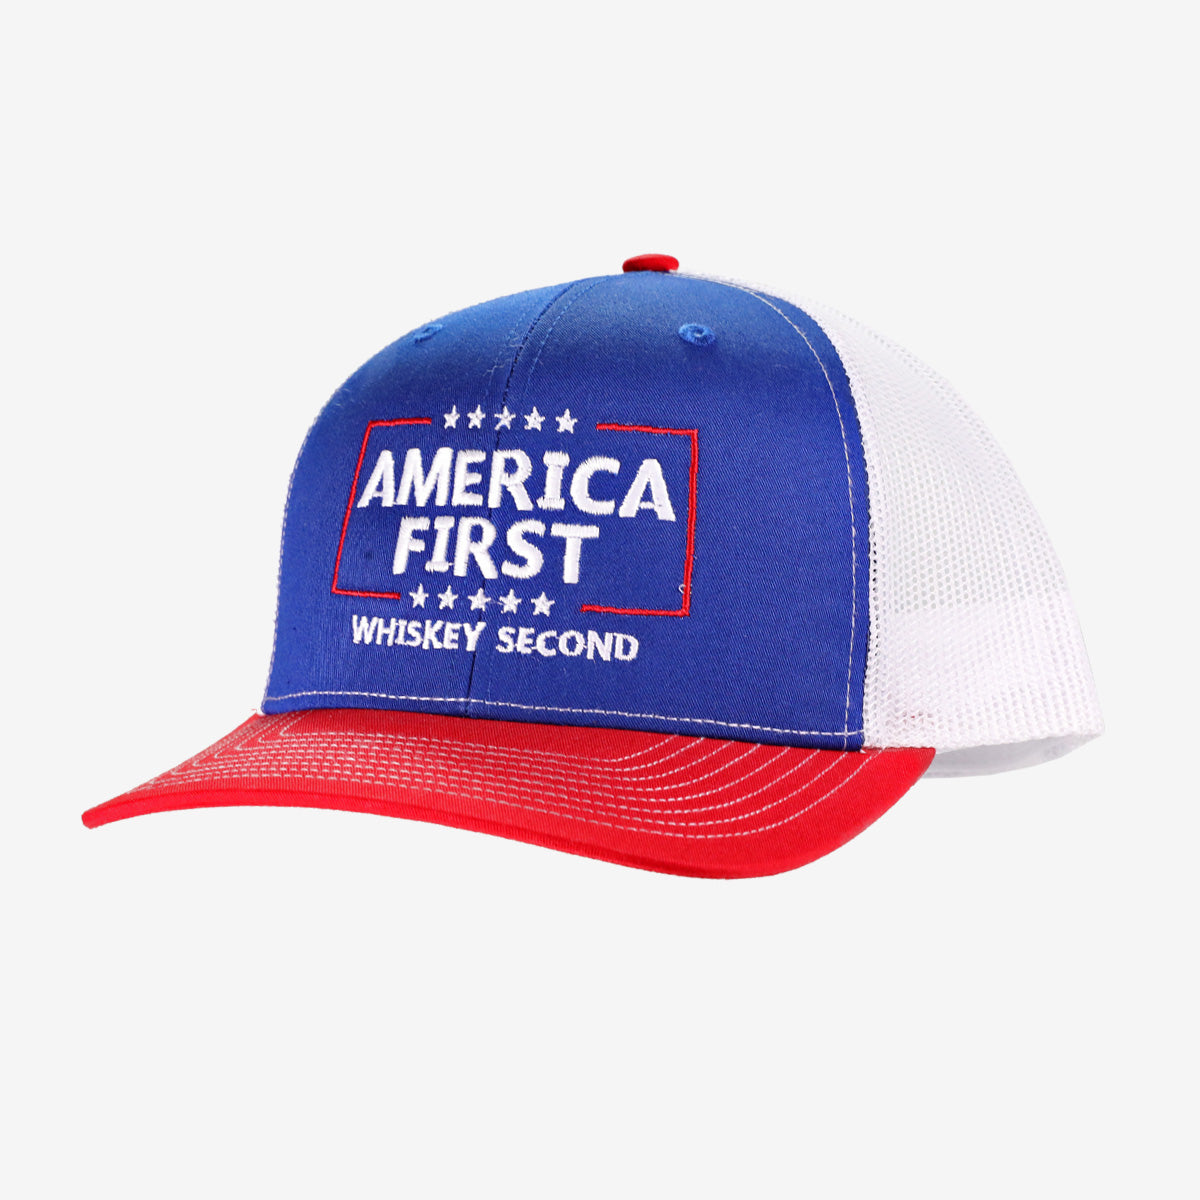 America First Whiskey Second Trucker Hat